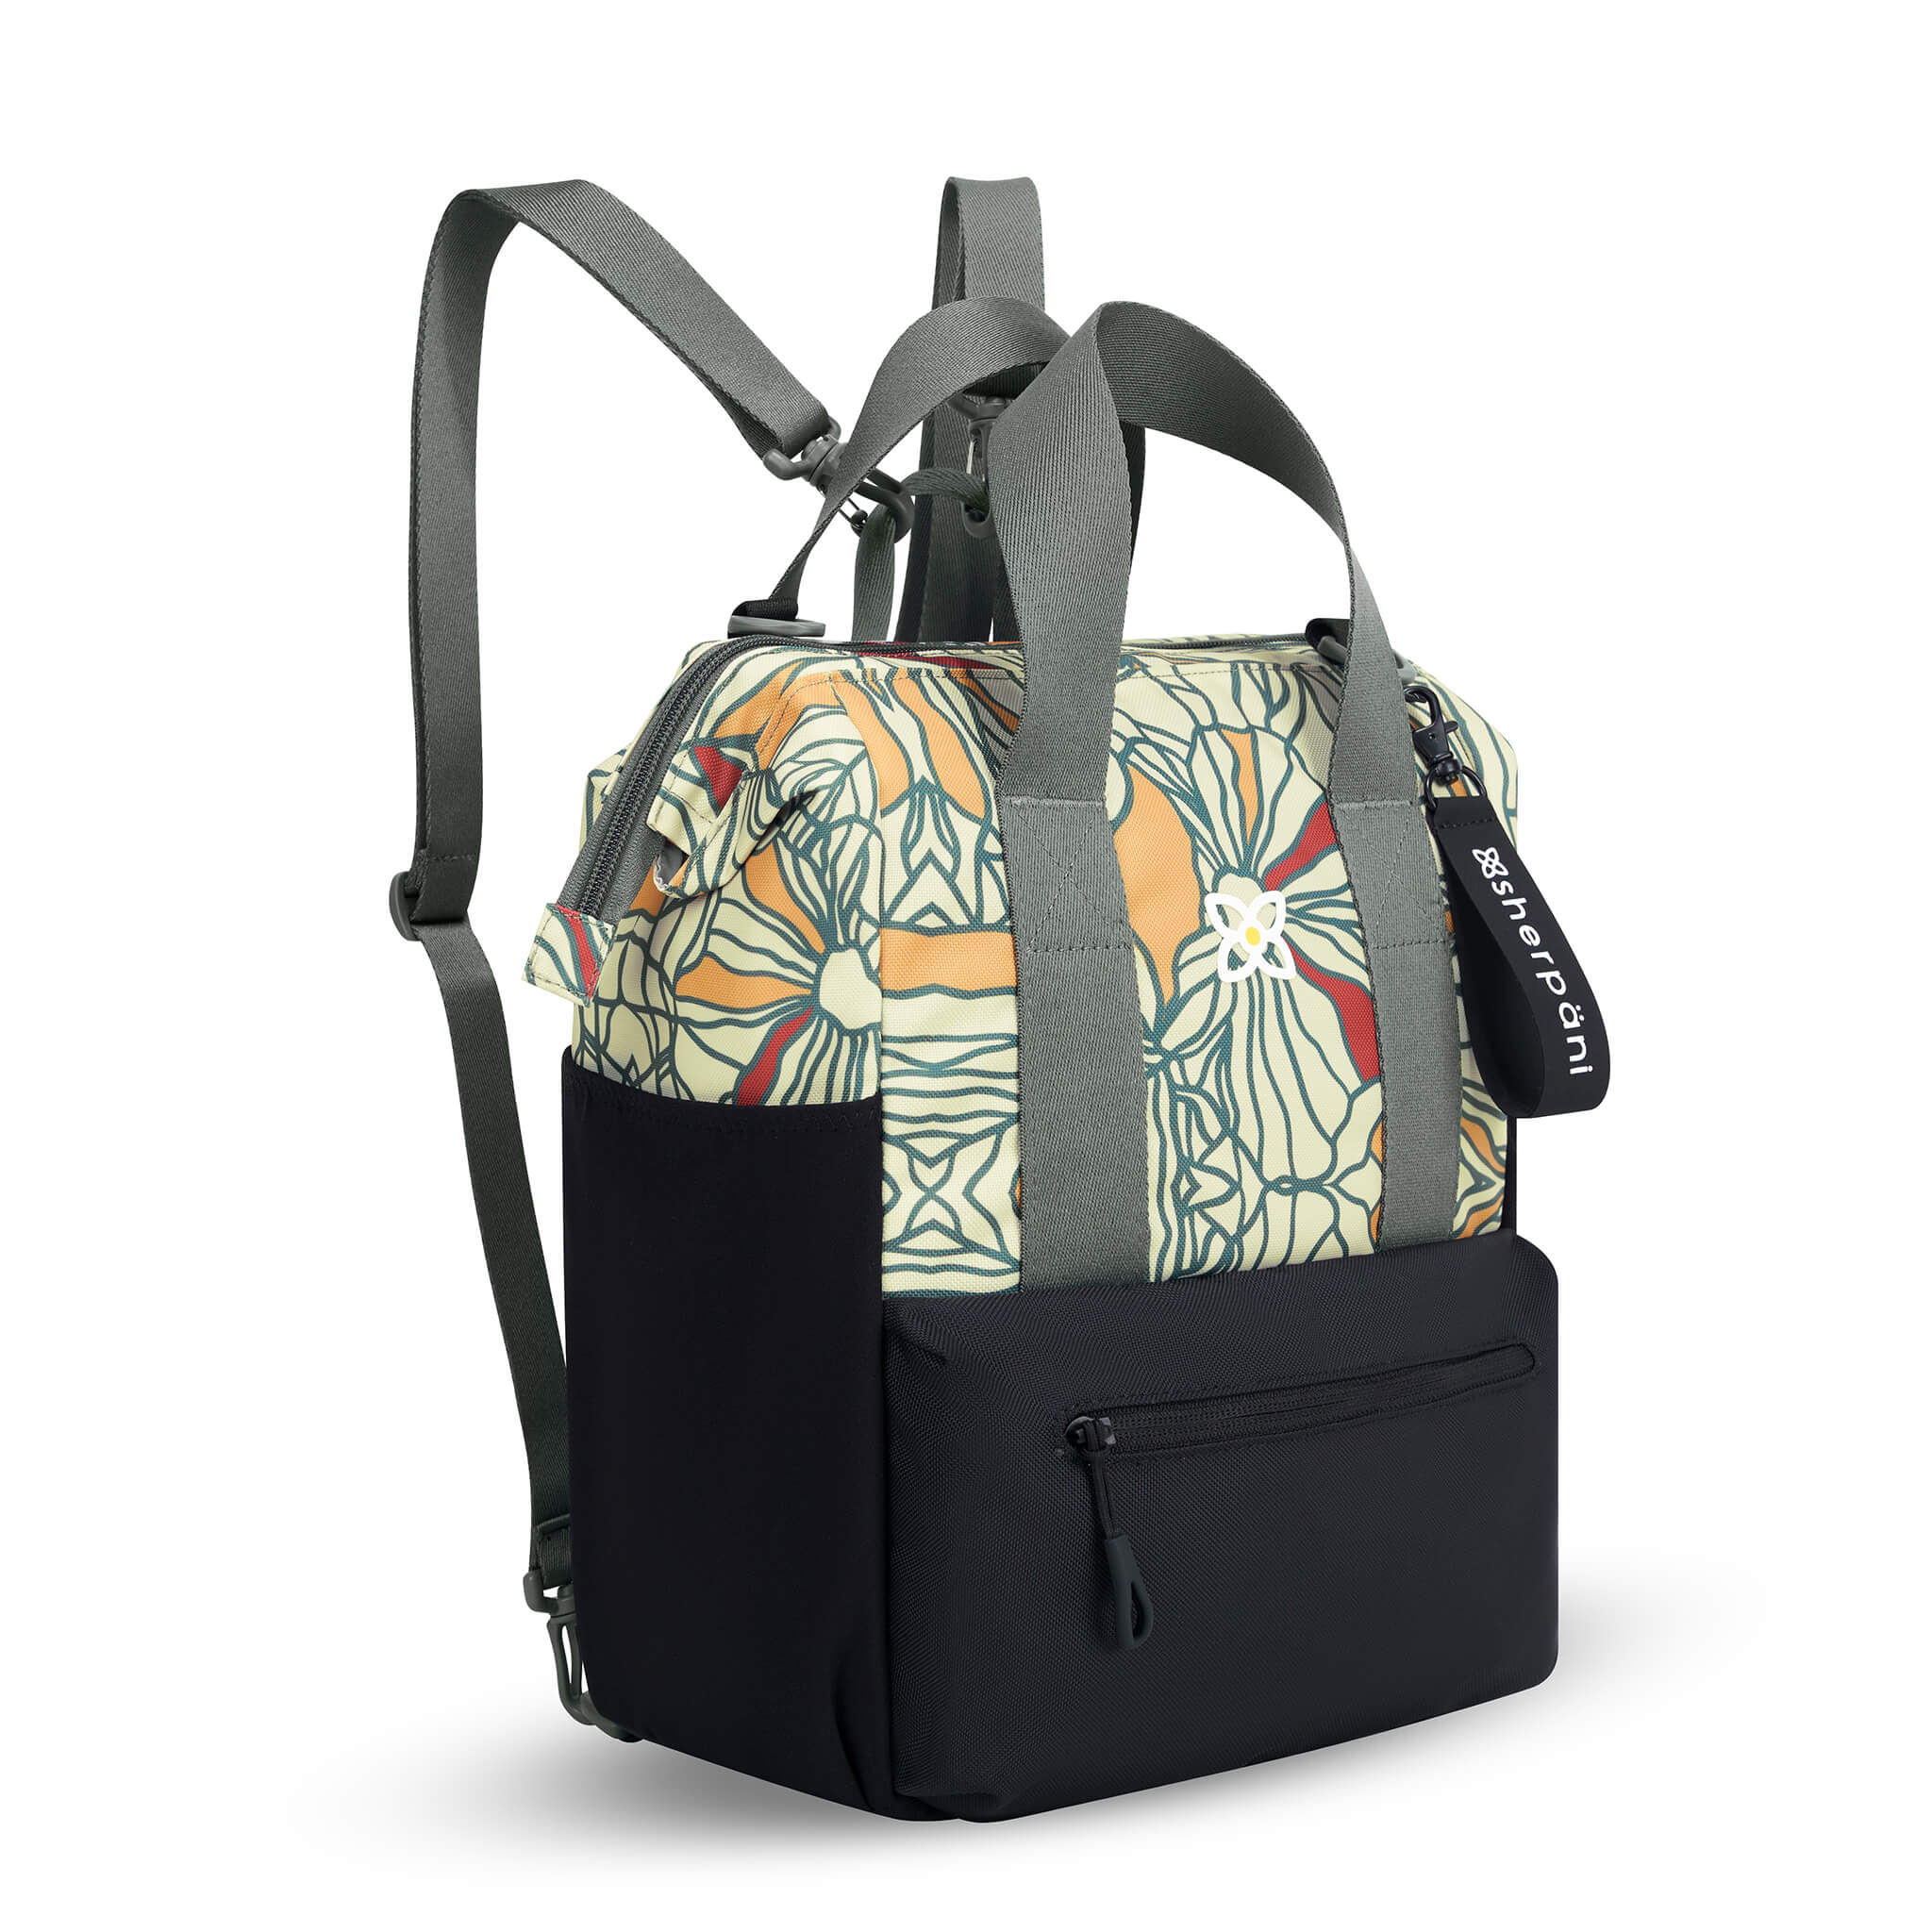 Angled front view of Sherpani convertible travel bag, the Dispatch in Fiori. Dispatch features include external zipper pocket, three water bottle holders, fixed tote handles, removable straps, detachable straps, adjustable straps, padded laptop sleeve and a doctor bag opening. The Fiori colorway is two-toned in black and a floral pattern with red accents.